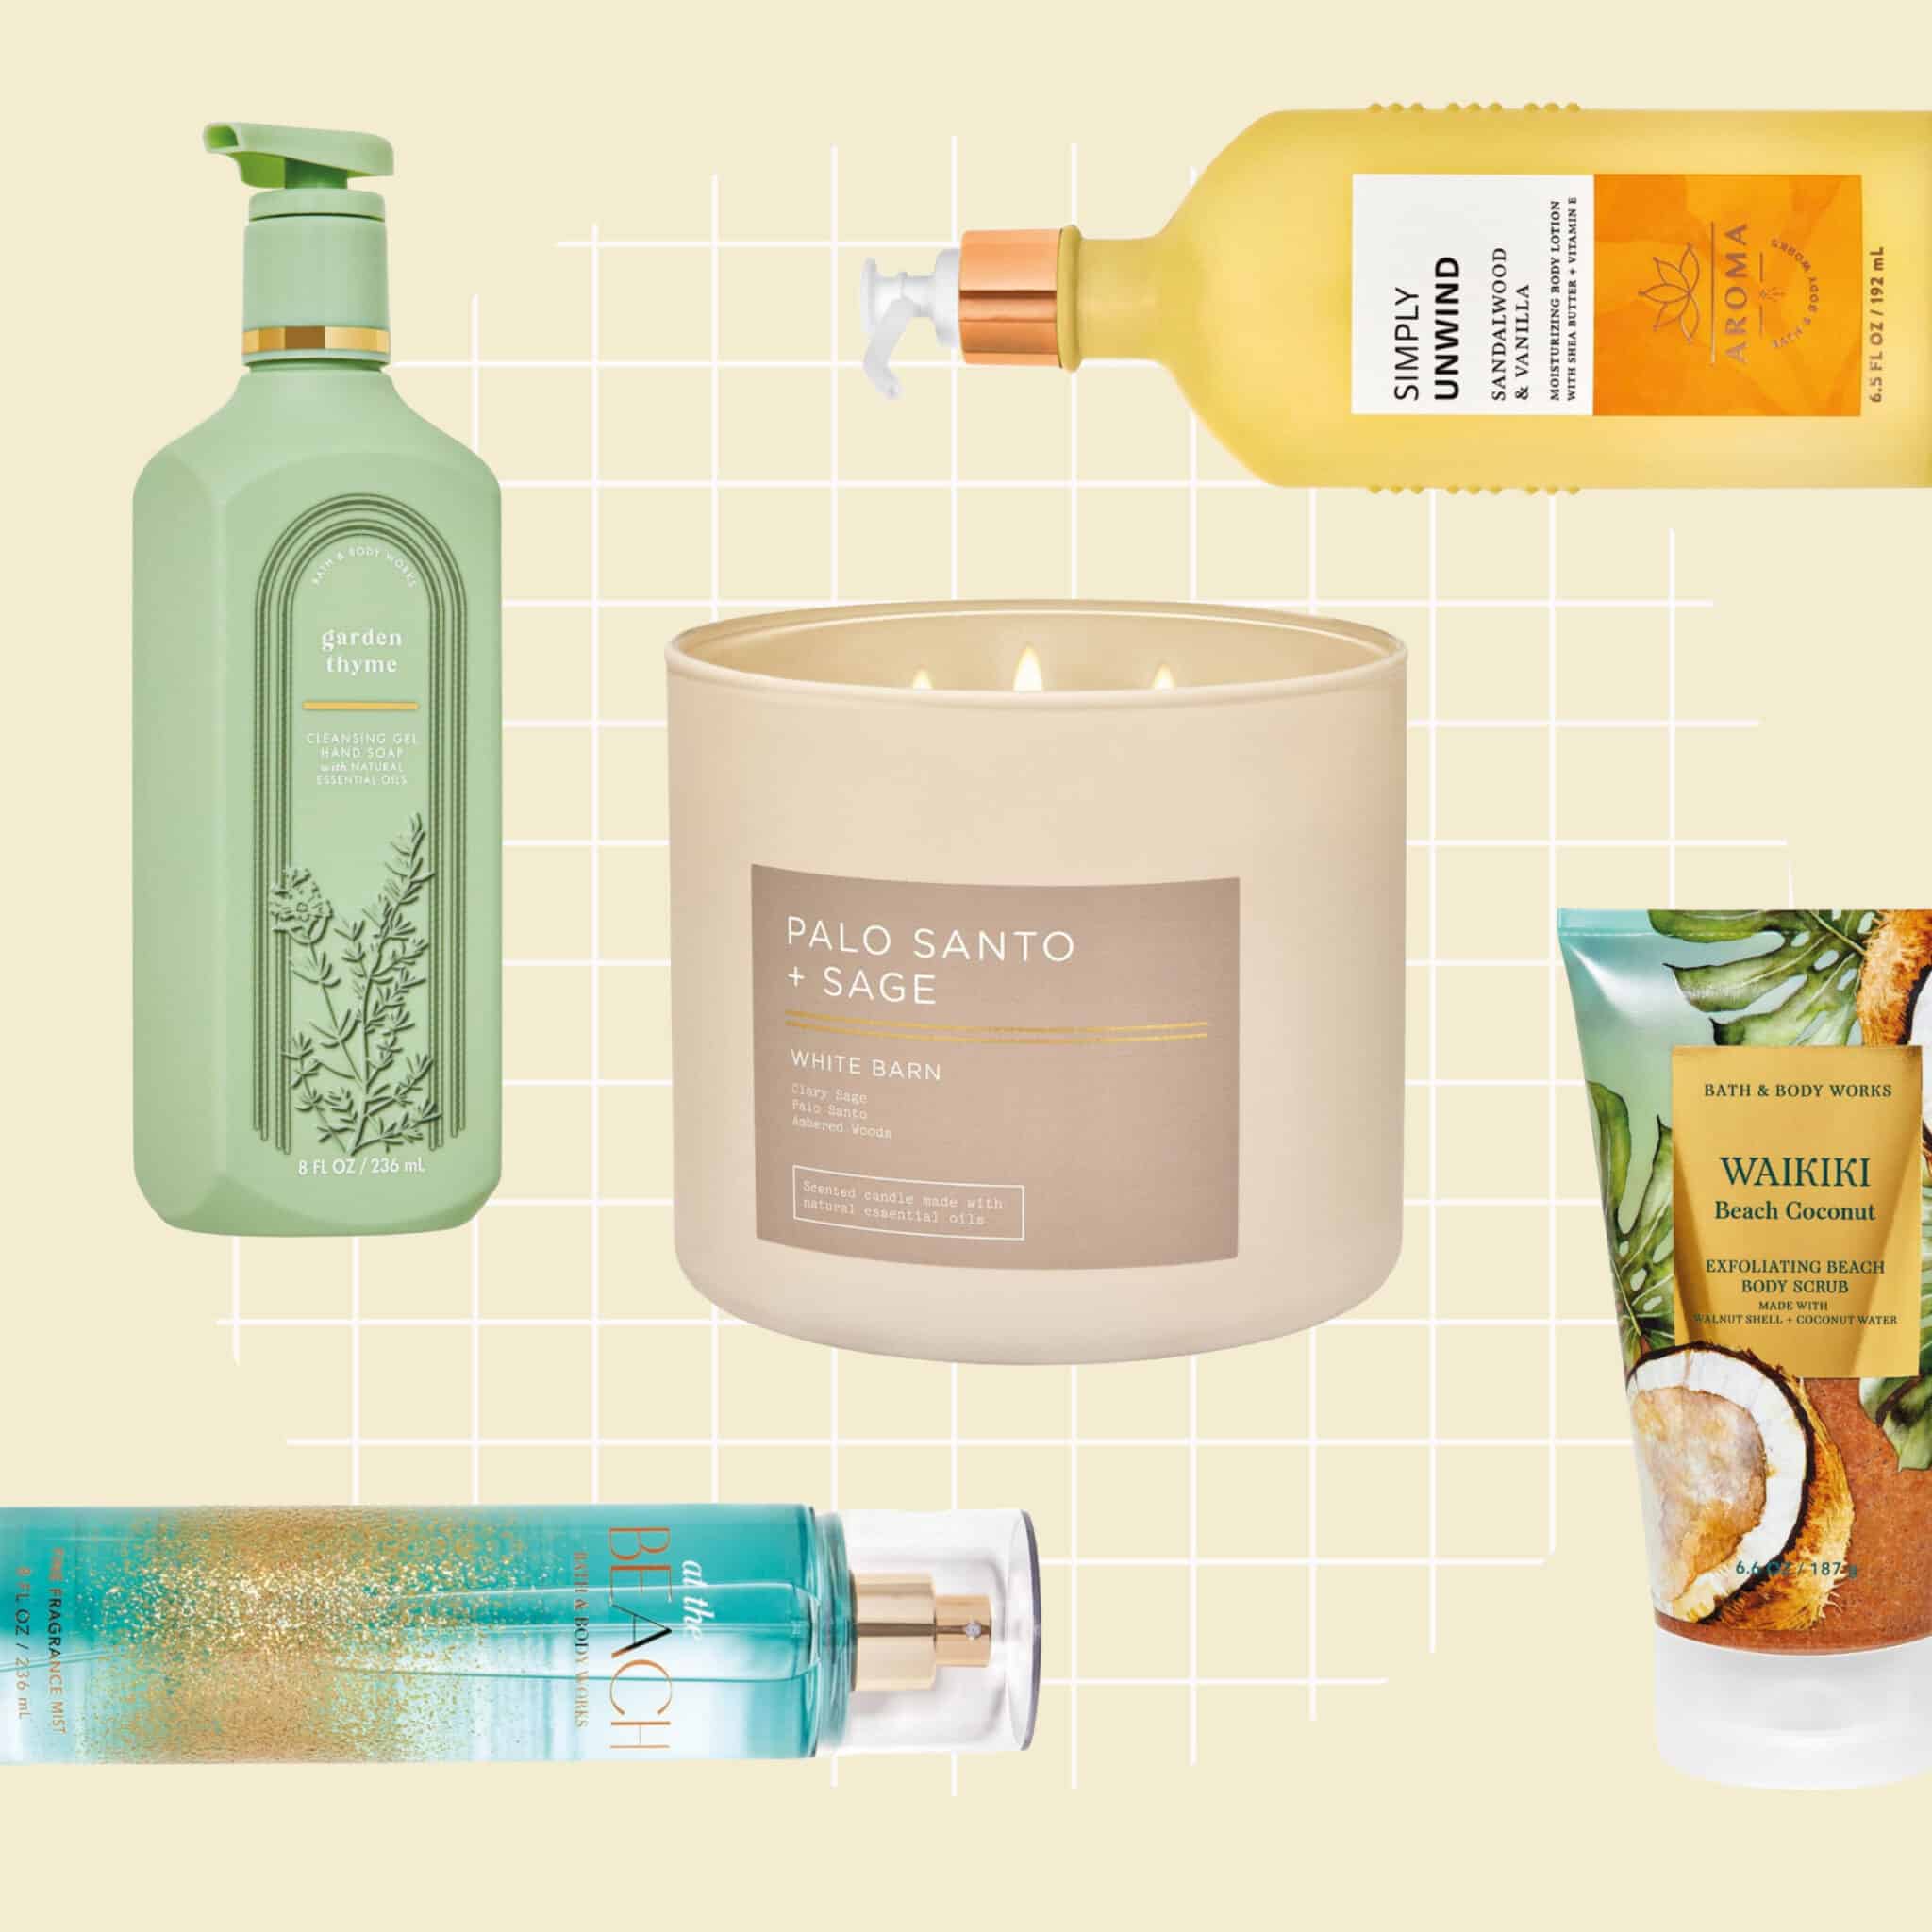 We’re Obsessed With This New Bath & Body Brand